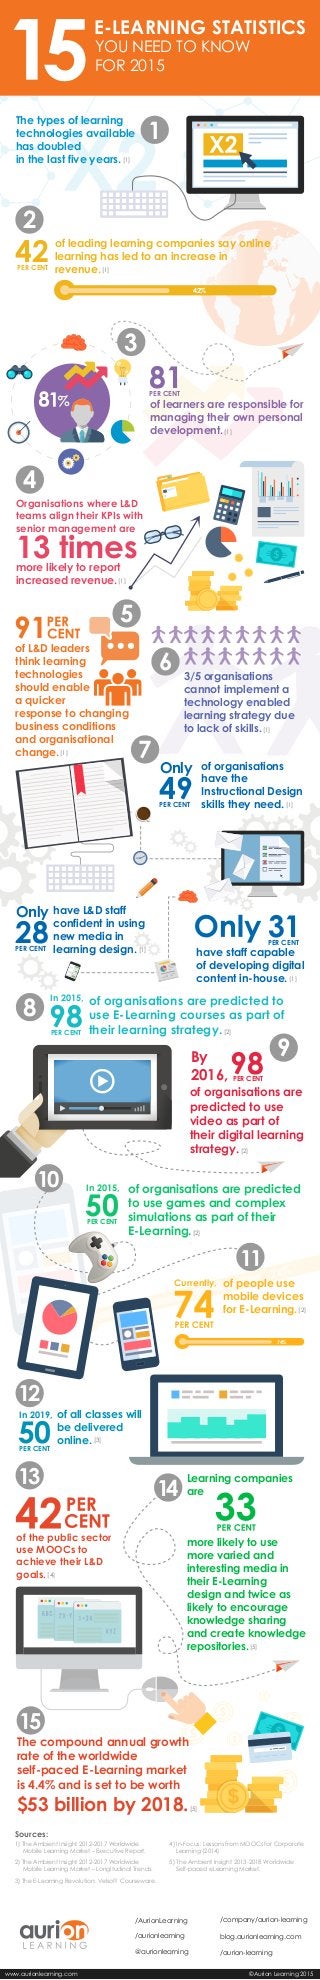 74%
42PER CENT
Sources:
1) The Ambient Insight 2012-2017 Worldwide
Mobile Learning Market – Executive Report.
2) The Ambient Insight 2012-2017 Worldwide
Mobile Learning Market – Longitudinal Trends.
3) The E-Learning Revolution: Velsoft Courseware.
4) In-Focus: Lessons from MOOCs for Corporate
Learning (2014)
5) The Ambient Insight 2013-2018 Worldwide
Self-paced eLearning Market.
@aurionlearning
/company/aurion-learning/AurionLearning
/aurionlearning blog.aurionlearning.com
/aurion-learning
www.aurionlearning.com ©Aurion Learning 2015
2015
[9]
E-LEARNING STATISTICS
YOU NEED TO KNOW
FOR 2015
The types of learning
technologies available
has doubled
in the last five years.
of leading learning companies say online
learning has led to an increase in
revenue.
81PER CENT
of learners are responsible for
managing their own personal
development.
Organisations where L&D
teams align their KPIs with
senior management are
13 timesmore likely to report
increased revenue.
of L&D leaders
think learning
technologies
should enable
a quicker
response to changing
business conditions
and organisational
change.
3/5 organisations
cannot implement a
technology enabled
learning strategy due
to lack of skills.
49PER CENT
Only of organisations
have the
Instructional Design
skills they need.
28PER CENT
Only have L&D staff
confident in using
new media in
learning design.
31PER CENT
have staff capable
of developing digital
content in-house.
of organisations are predicted to
use E-Learning courses as part of
their learning strategy.
In 2015,
98PER CENT
of organisations are
predicted to use
video as part of
their digital learning
strategy.
98PER CENT
By
2016,
of organisations are predicted
to use games and complex
simulations as part of their
E-Learning.
In 2015,
50PER CENT
of people use
mobile devices
for E-Learning.
Currently,
of all classes will
be delivered
online.
In 2019,
50PER CENT
of the public sector
use MOOCs to
achieve their L&D
goals.
Learning companies
are
more likely to use
more varied and
interesting media in
their E-Learning
design and twice as
likely to encourage
knowledge sharing
and create knowledge
repositories.
The compound annual growth
rate of the worldwide
self-paced E-Learning market
is 4.4% and is set to be worth
$53 billion by 2018.
42%
1
2
3
4
5
6
7
8
9
10
11
74%
12
13
14
[1]
[1]
[1]
[1]
[1]
[1]
[1]
[1]
[1]
[2]
[2]
[2]
[2]
[3]
[4]
[5]
[5]
15
 